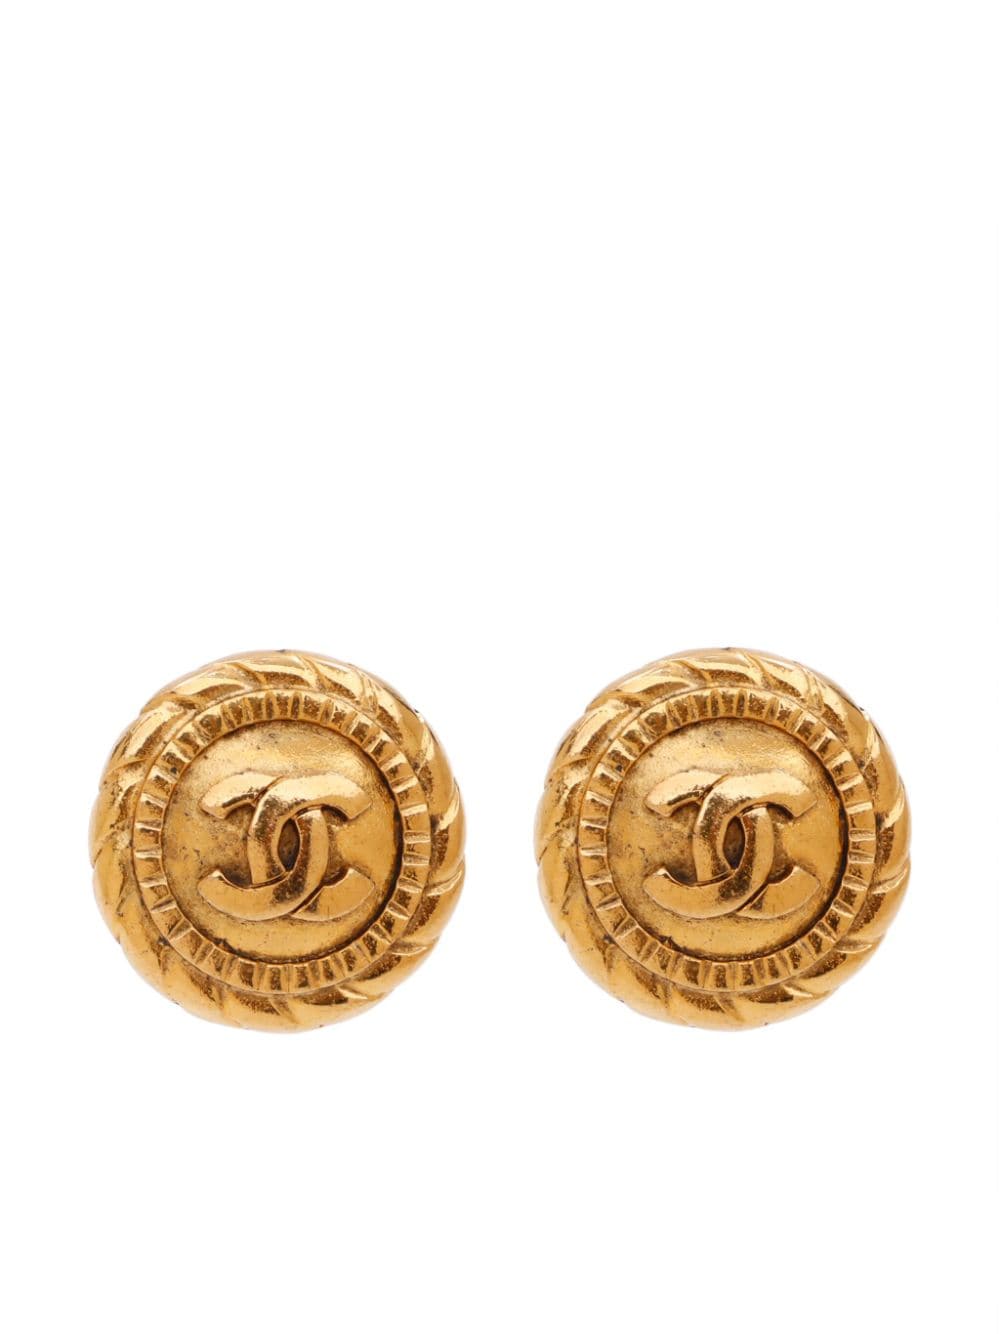 Pre-owned Chanel 1981-1985 Cc Button Clip-on Earrings In Gold